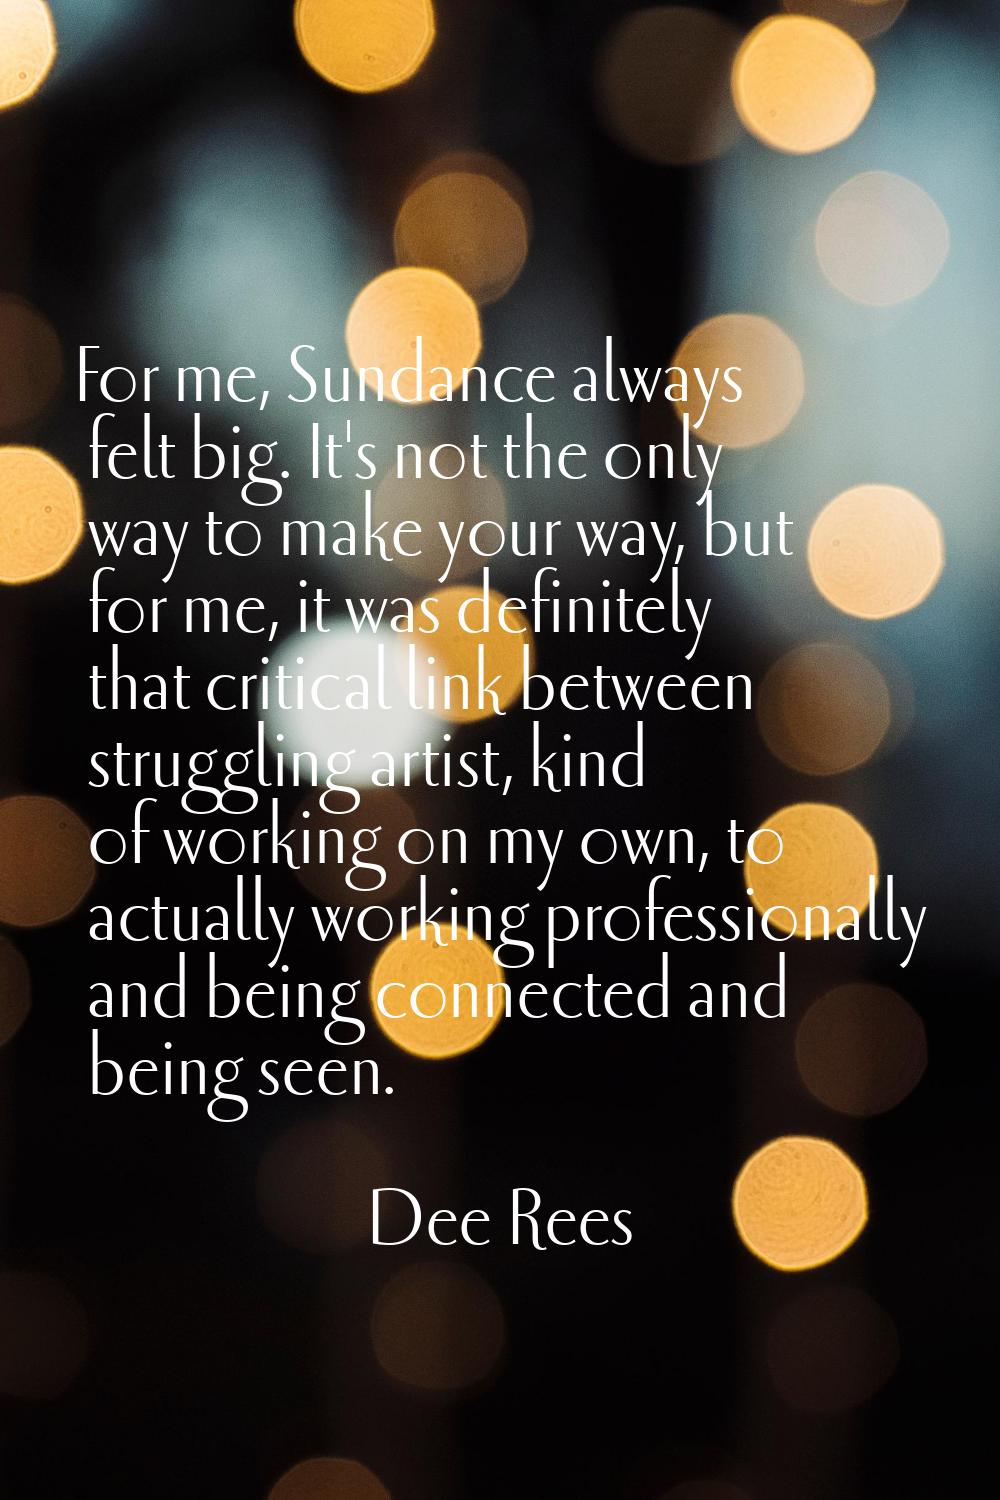 For me, Sundance always felt big. It's not the only way to make your way, but for me, it was defini